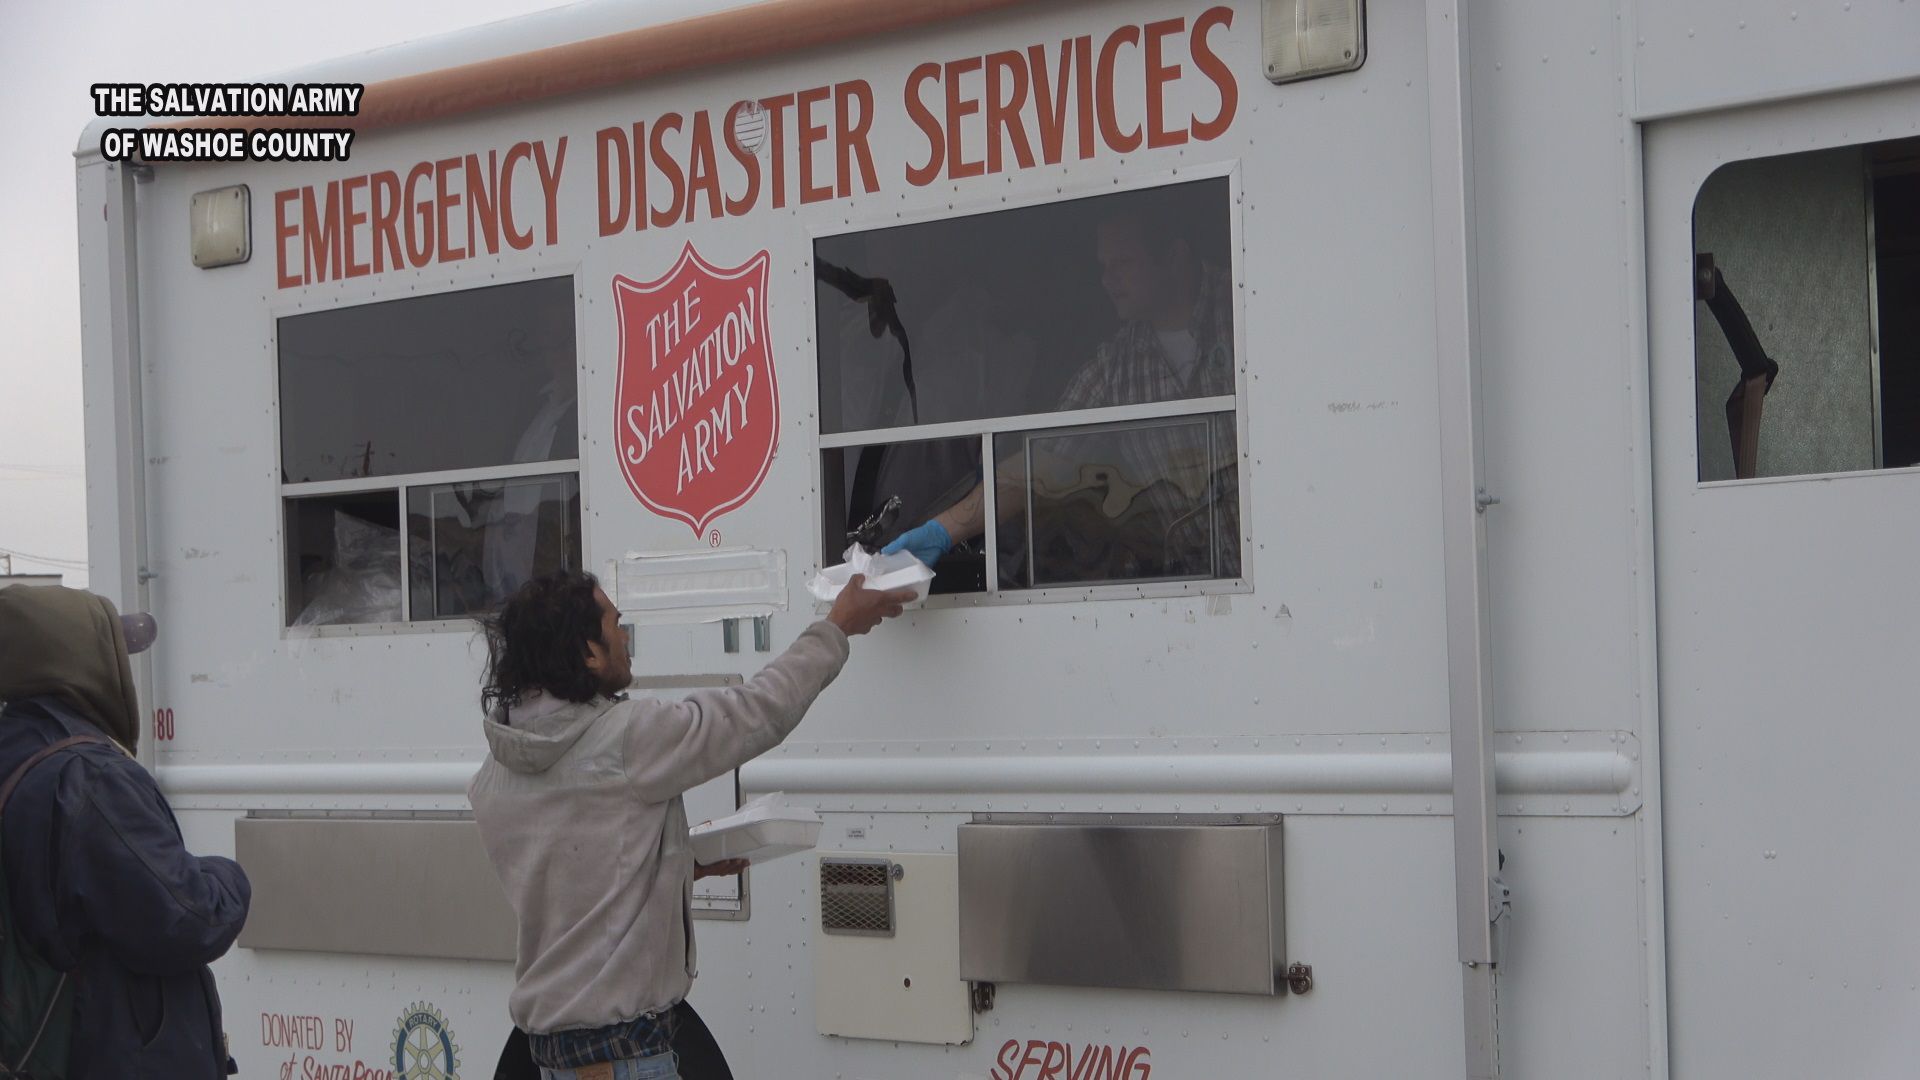 Salvation Army Stepping Up To Help Those In Need During Pandemic